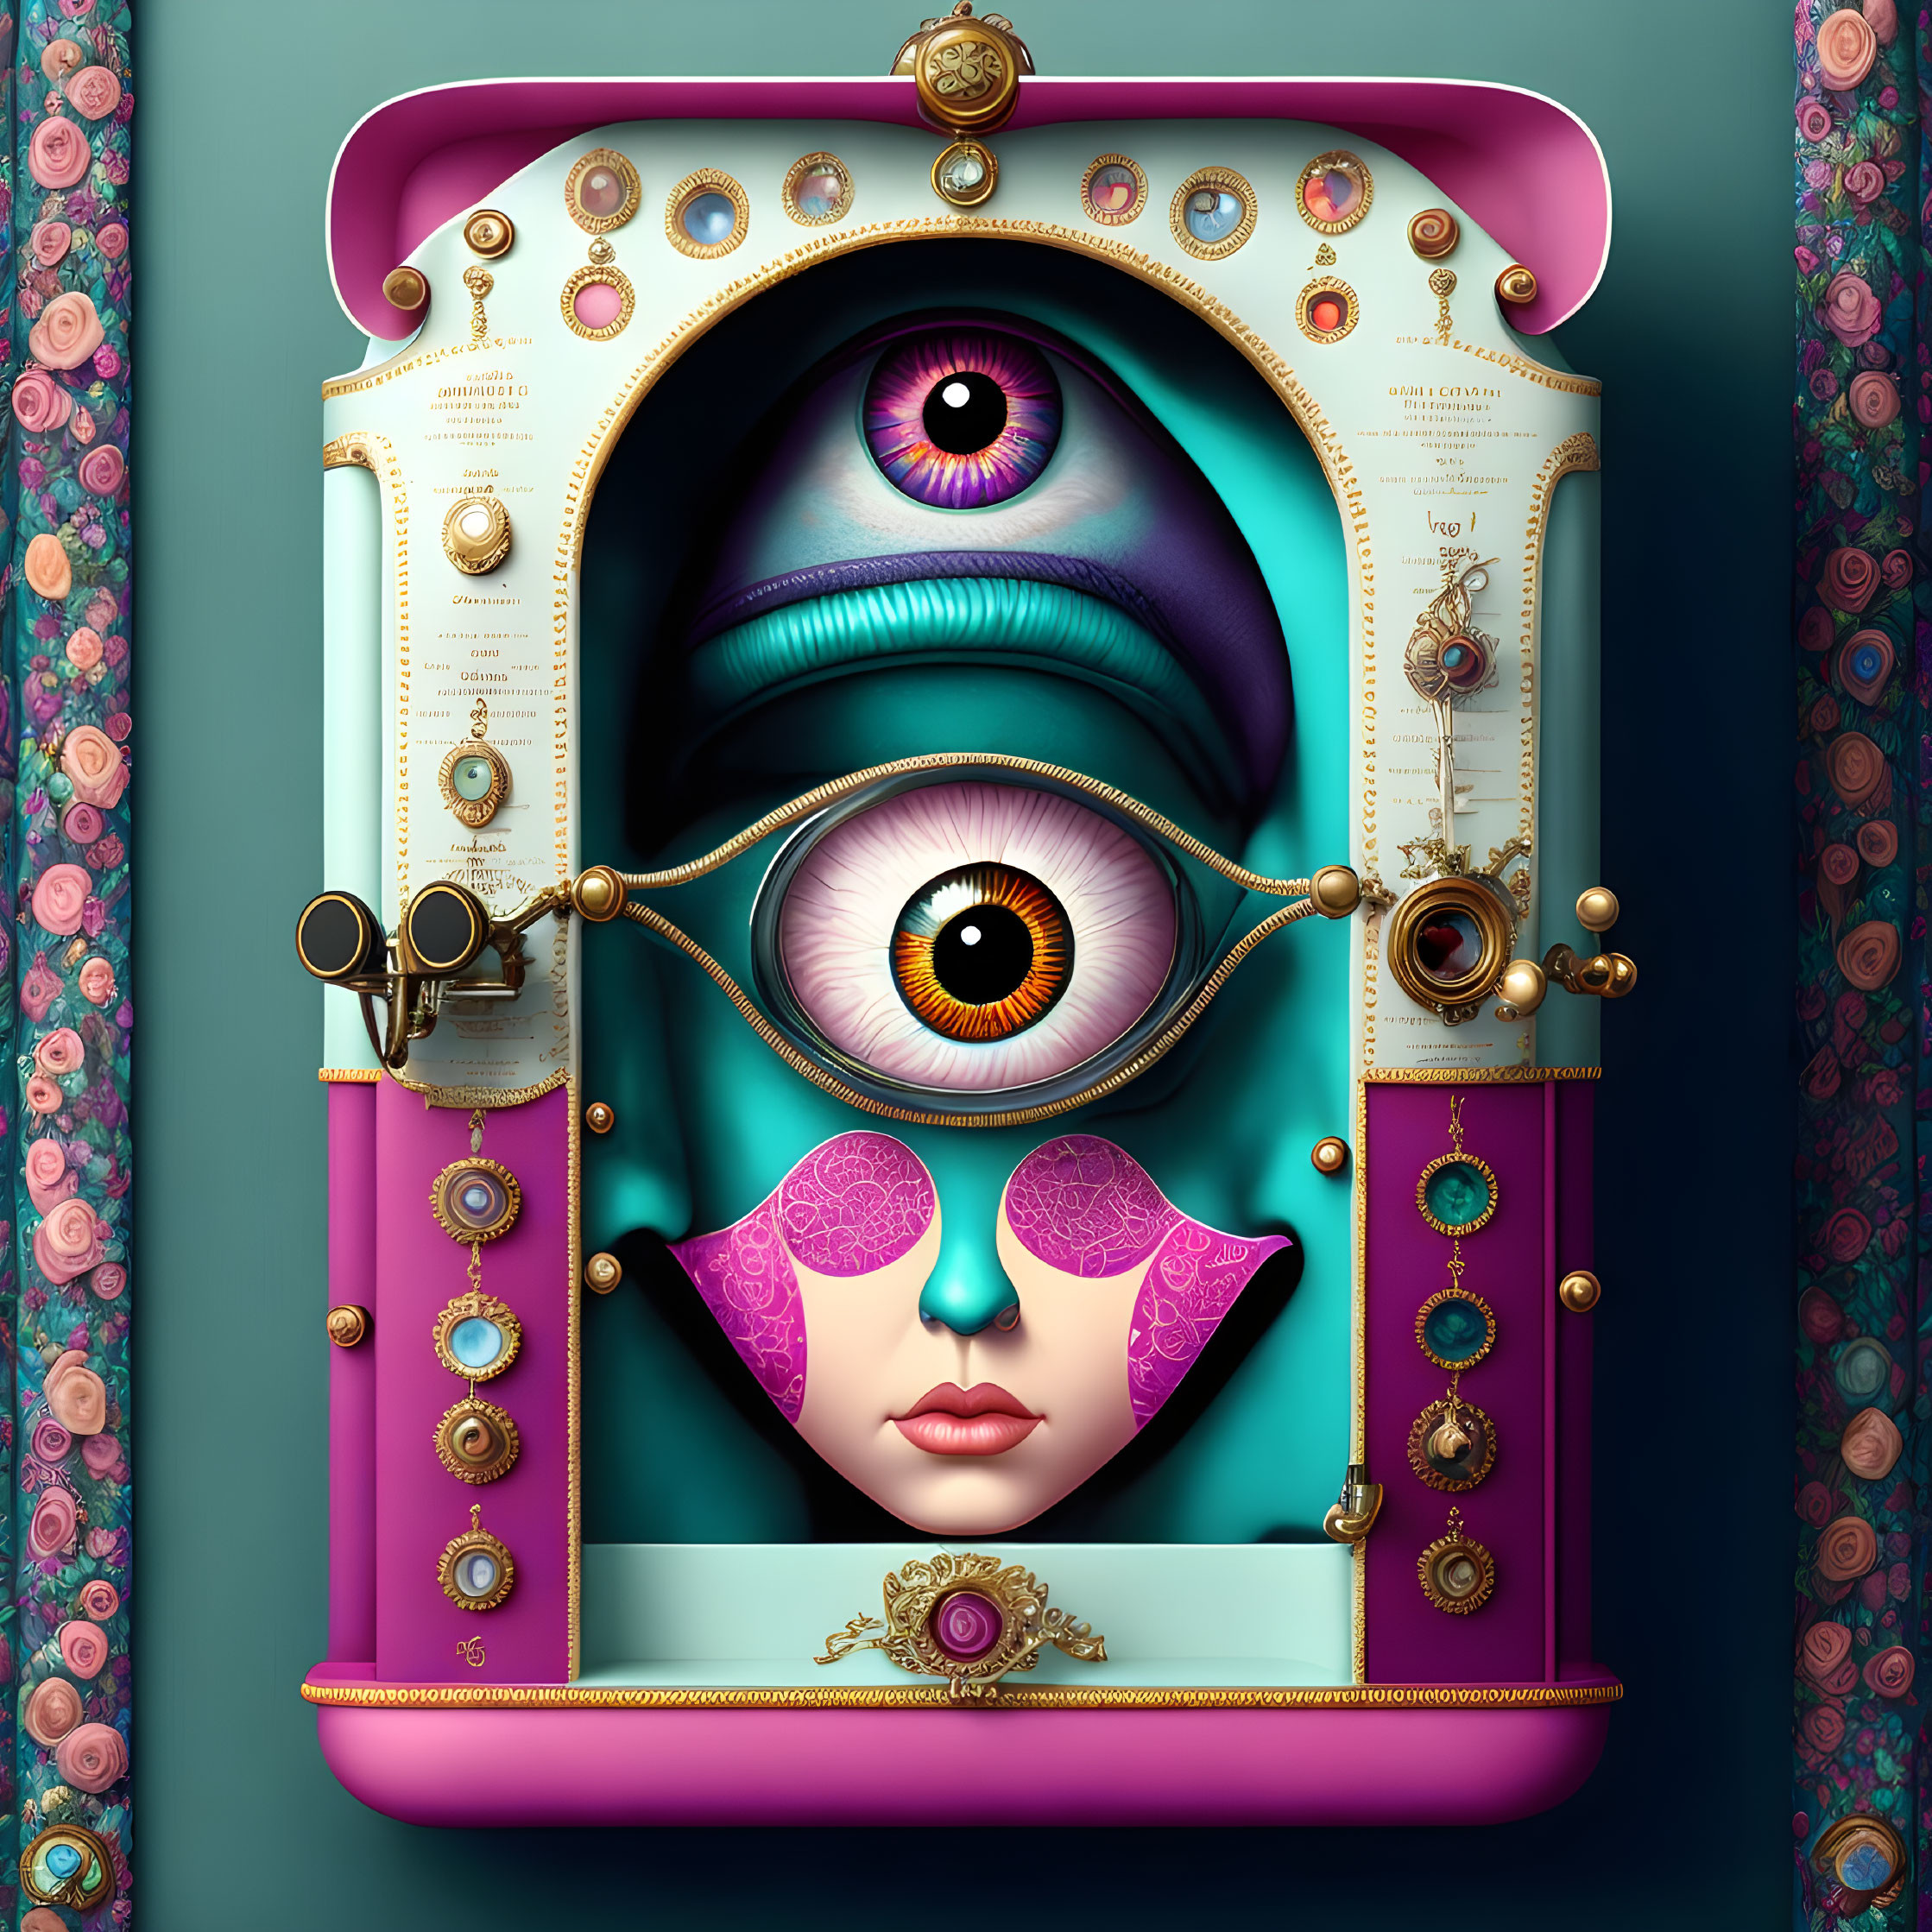 Surreal image with eye, nose, and mouth in ornate frame